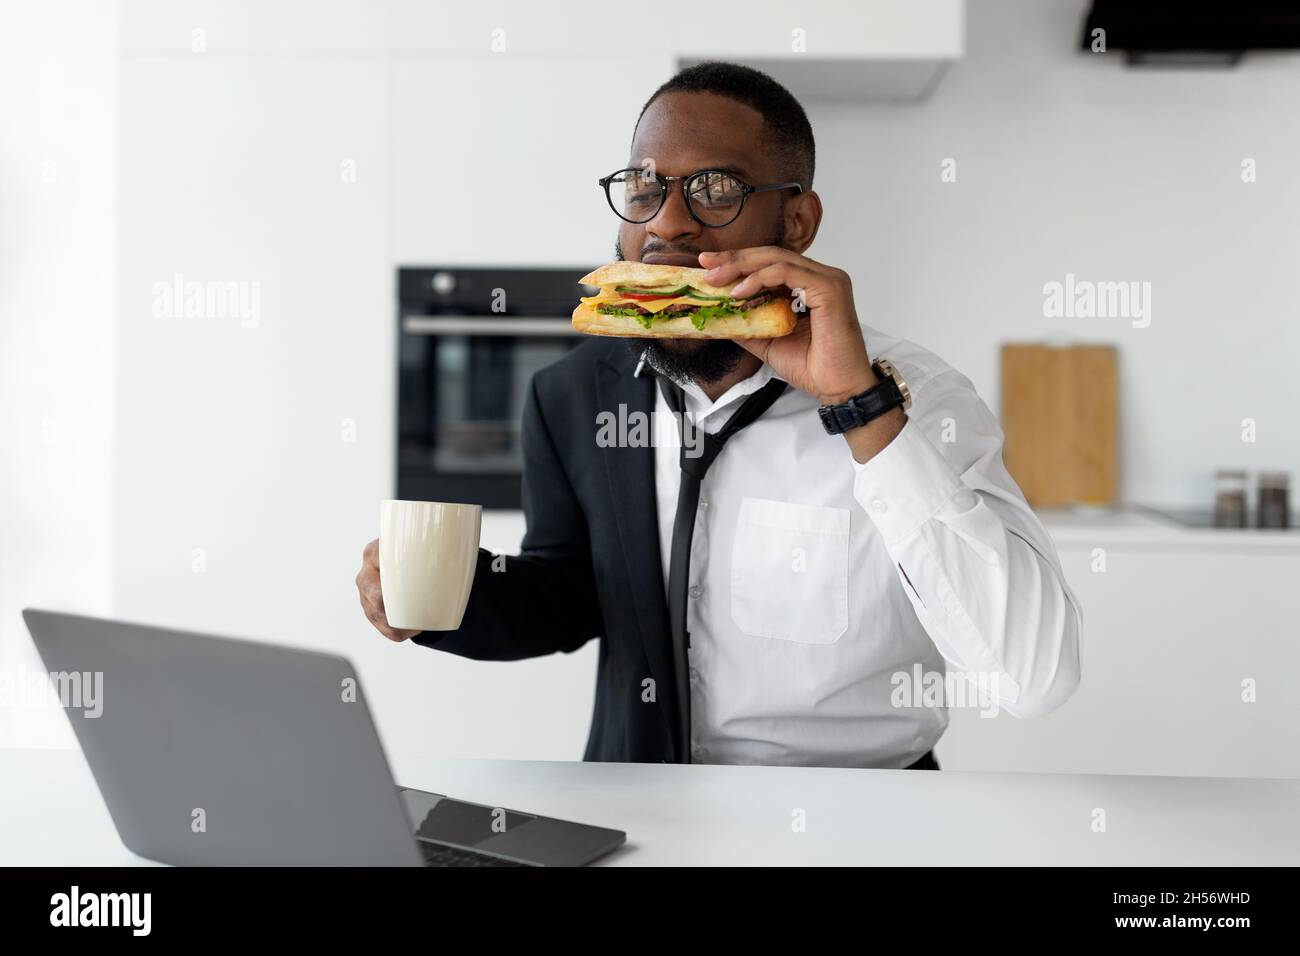 Black man rushing to work eating sandwich at home Stock Photo